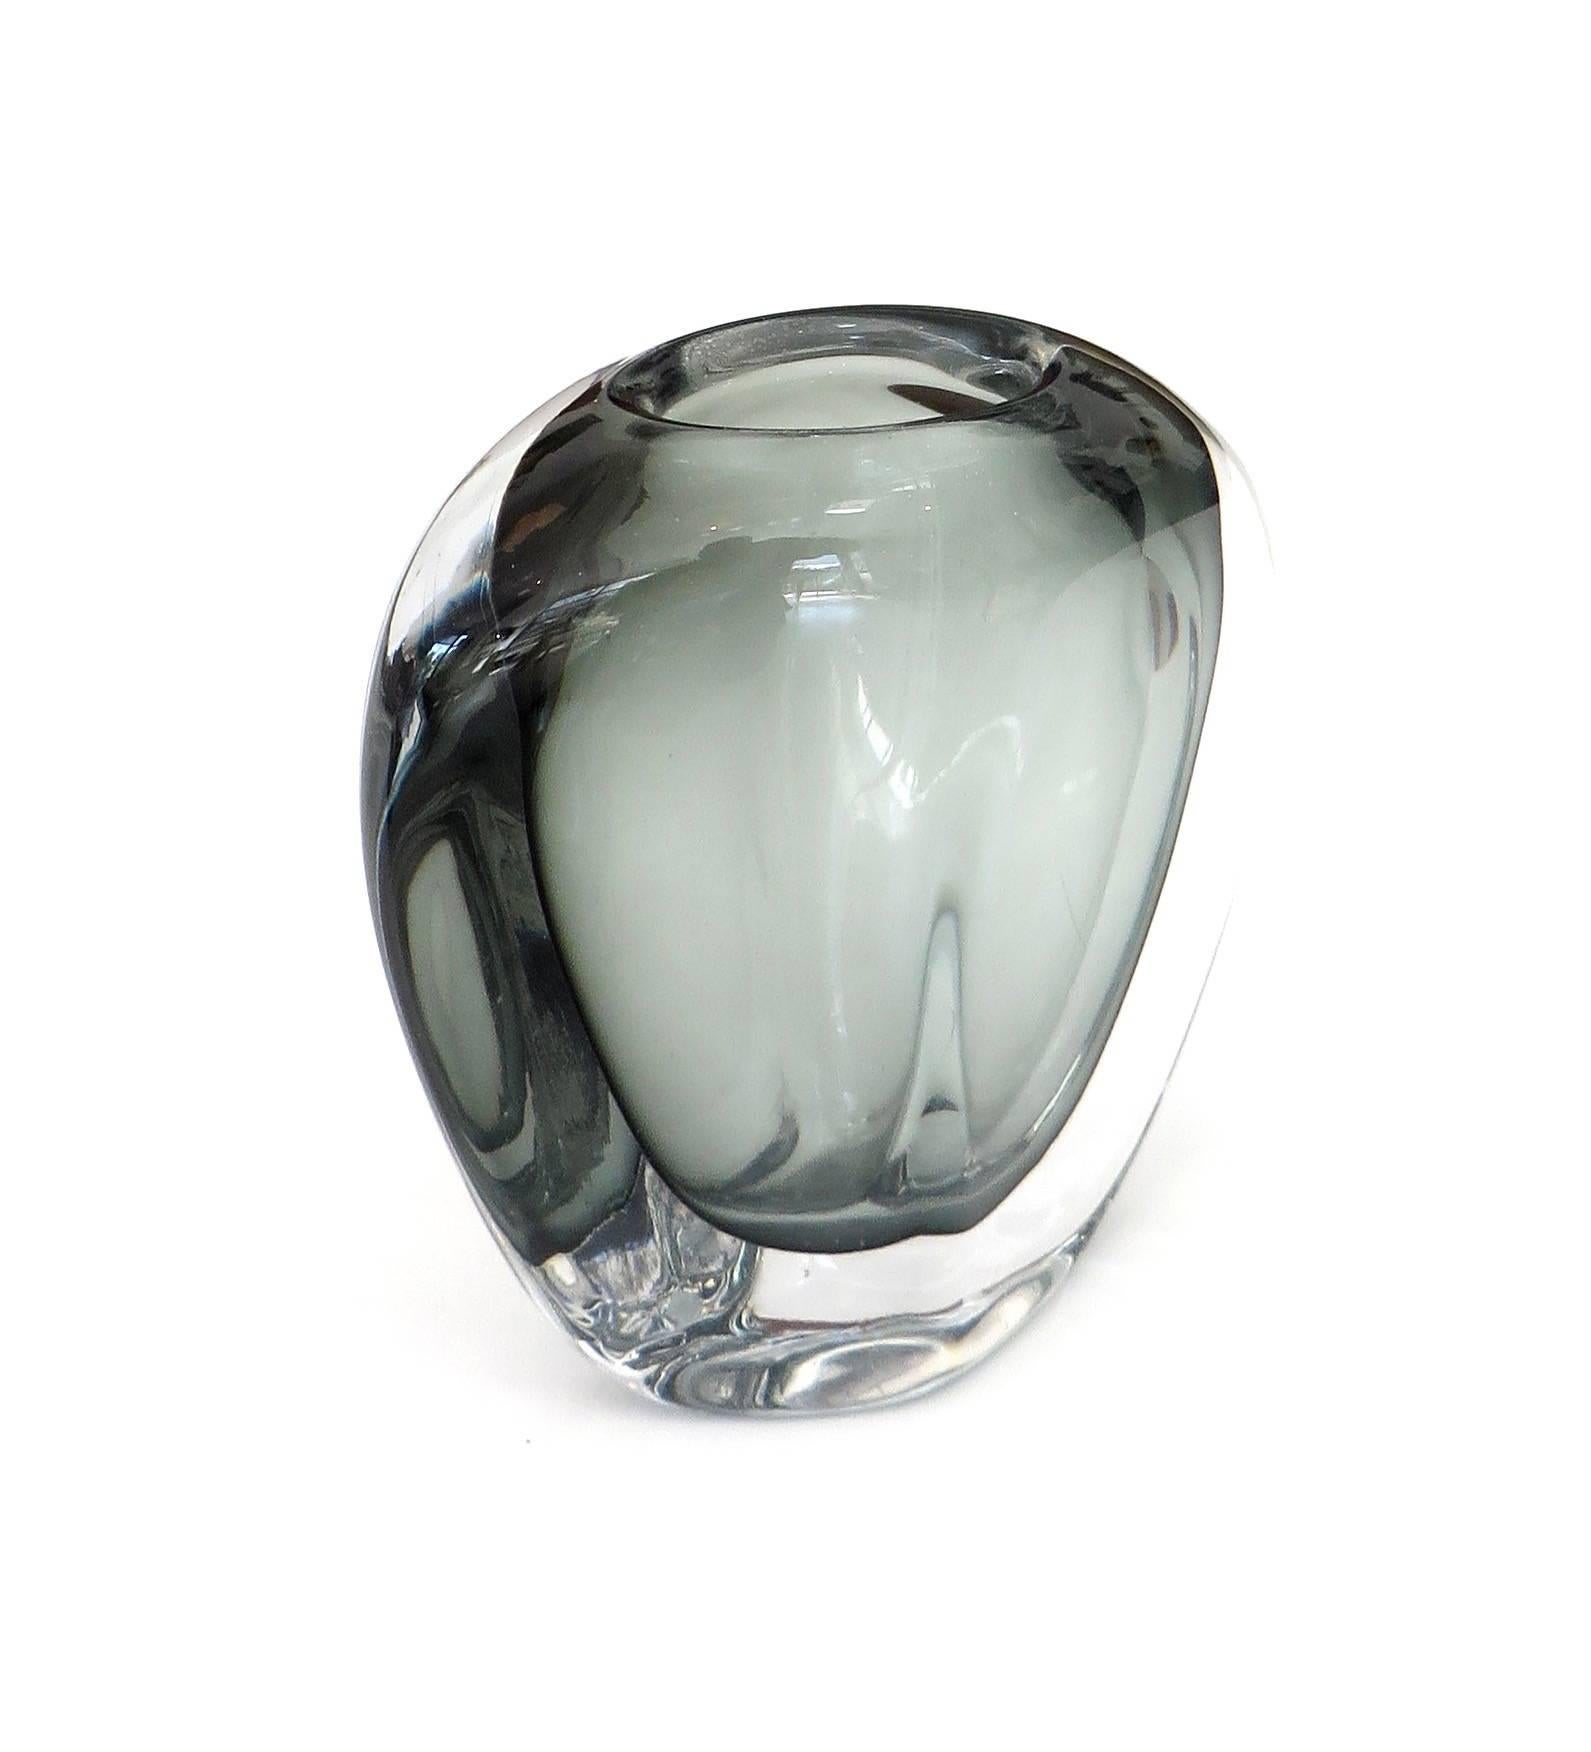 A Swedish vintage 'Sommerso' glass dusk vase by Nils Landberg for Orrefors, circa 1950s. The piece has a smoked charcoal interior, cased within a clear glass layer. Very good vintage condition, with age appropriate wear, including some scratches to